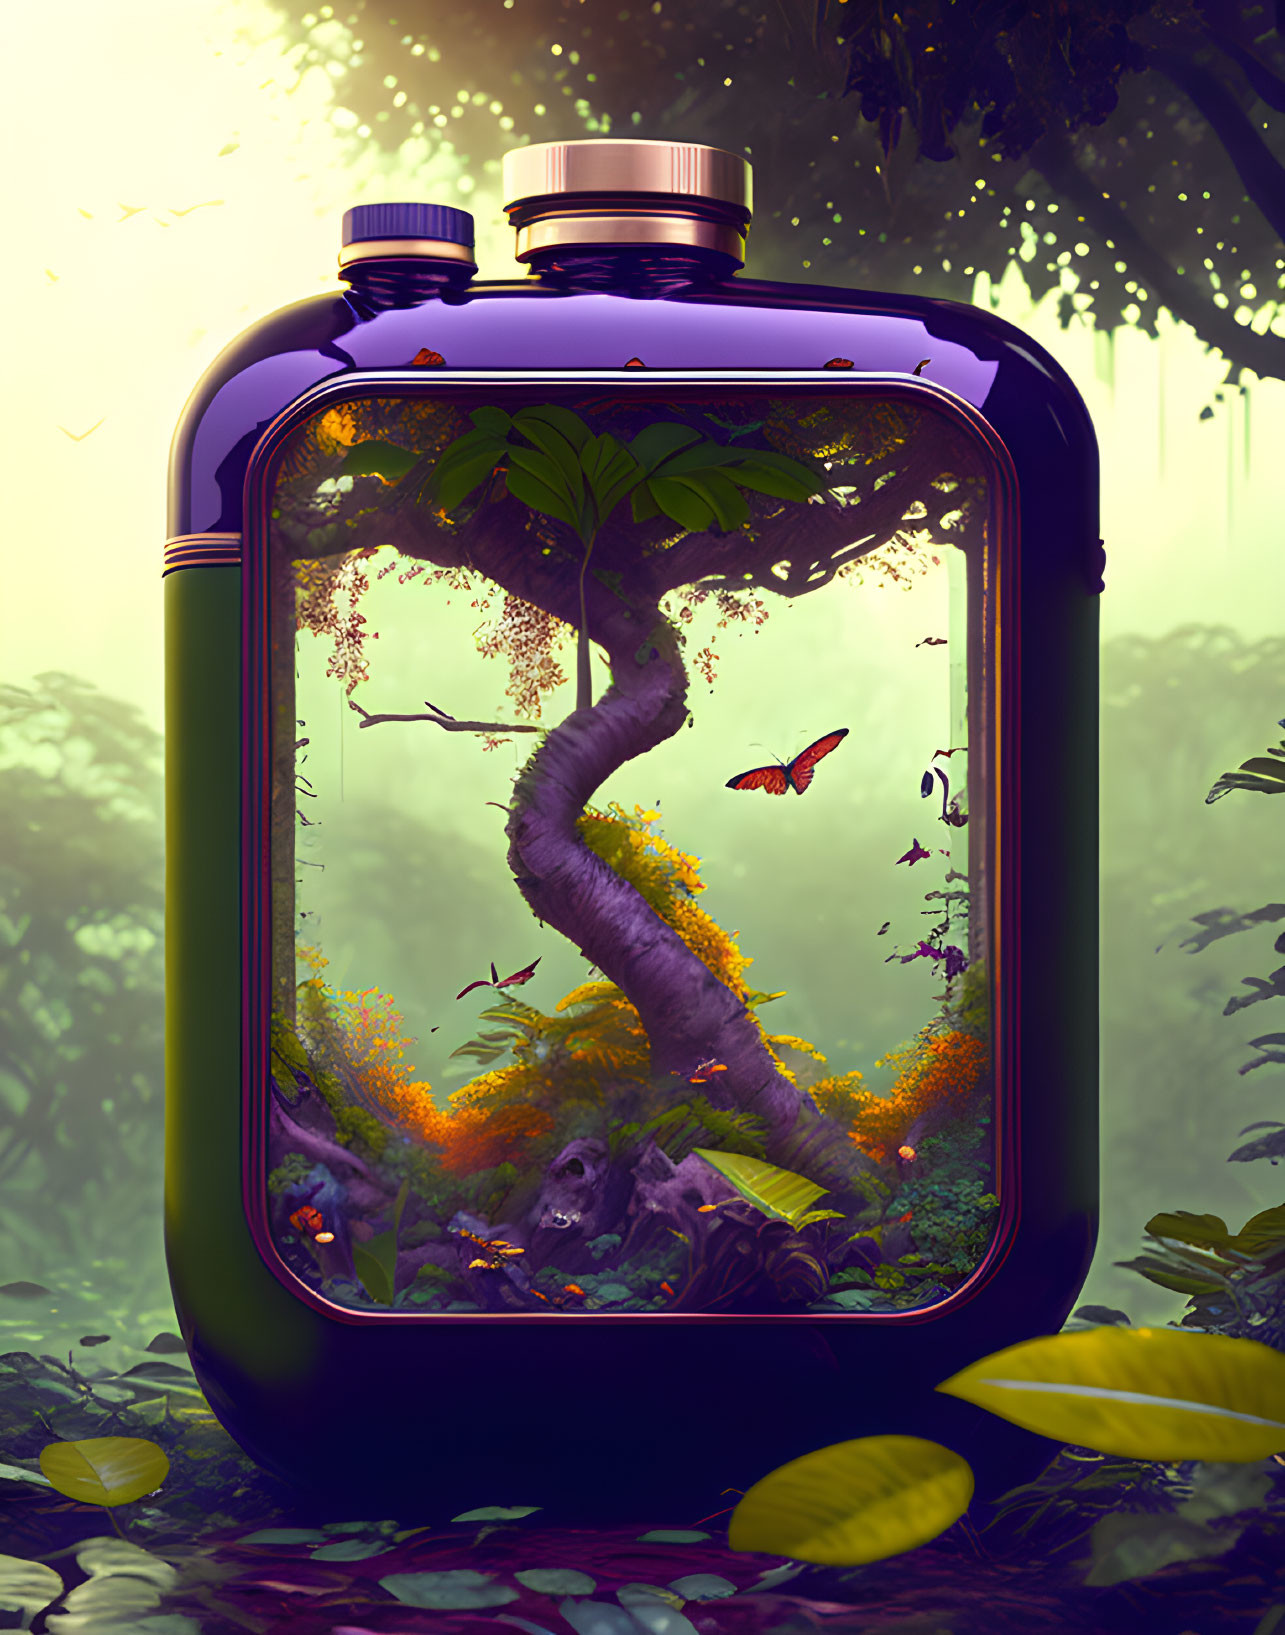 Illustration of twisting tree in glass jar with butterflies and falling leaves in misty forest.